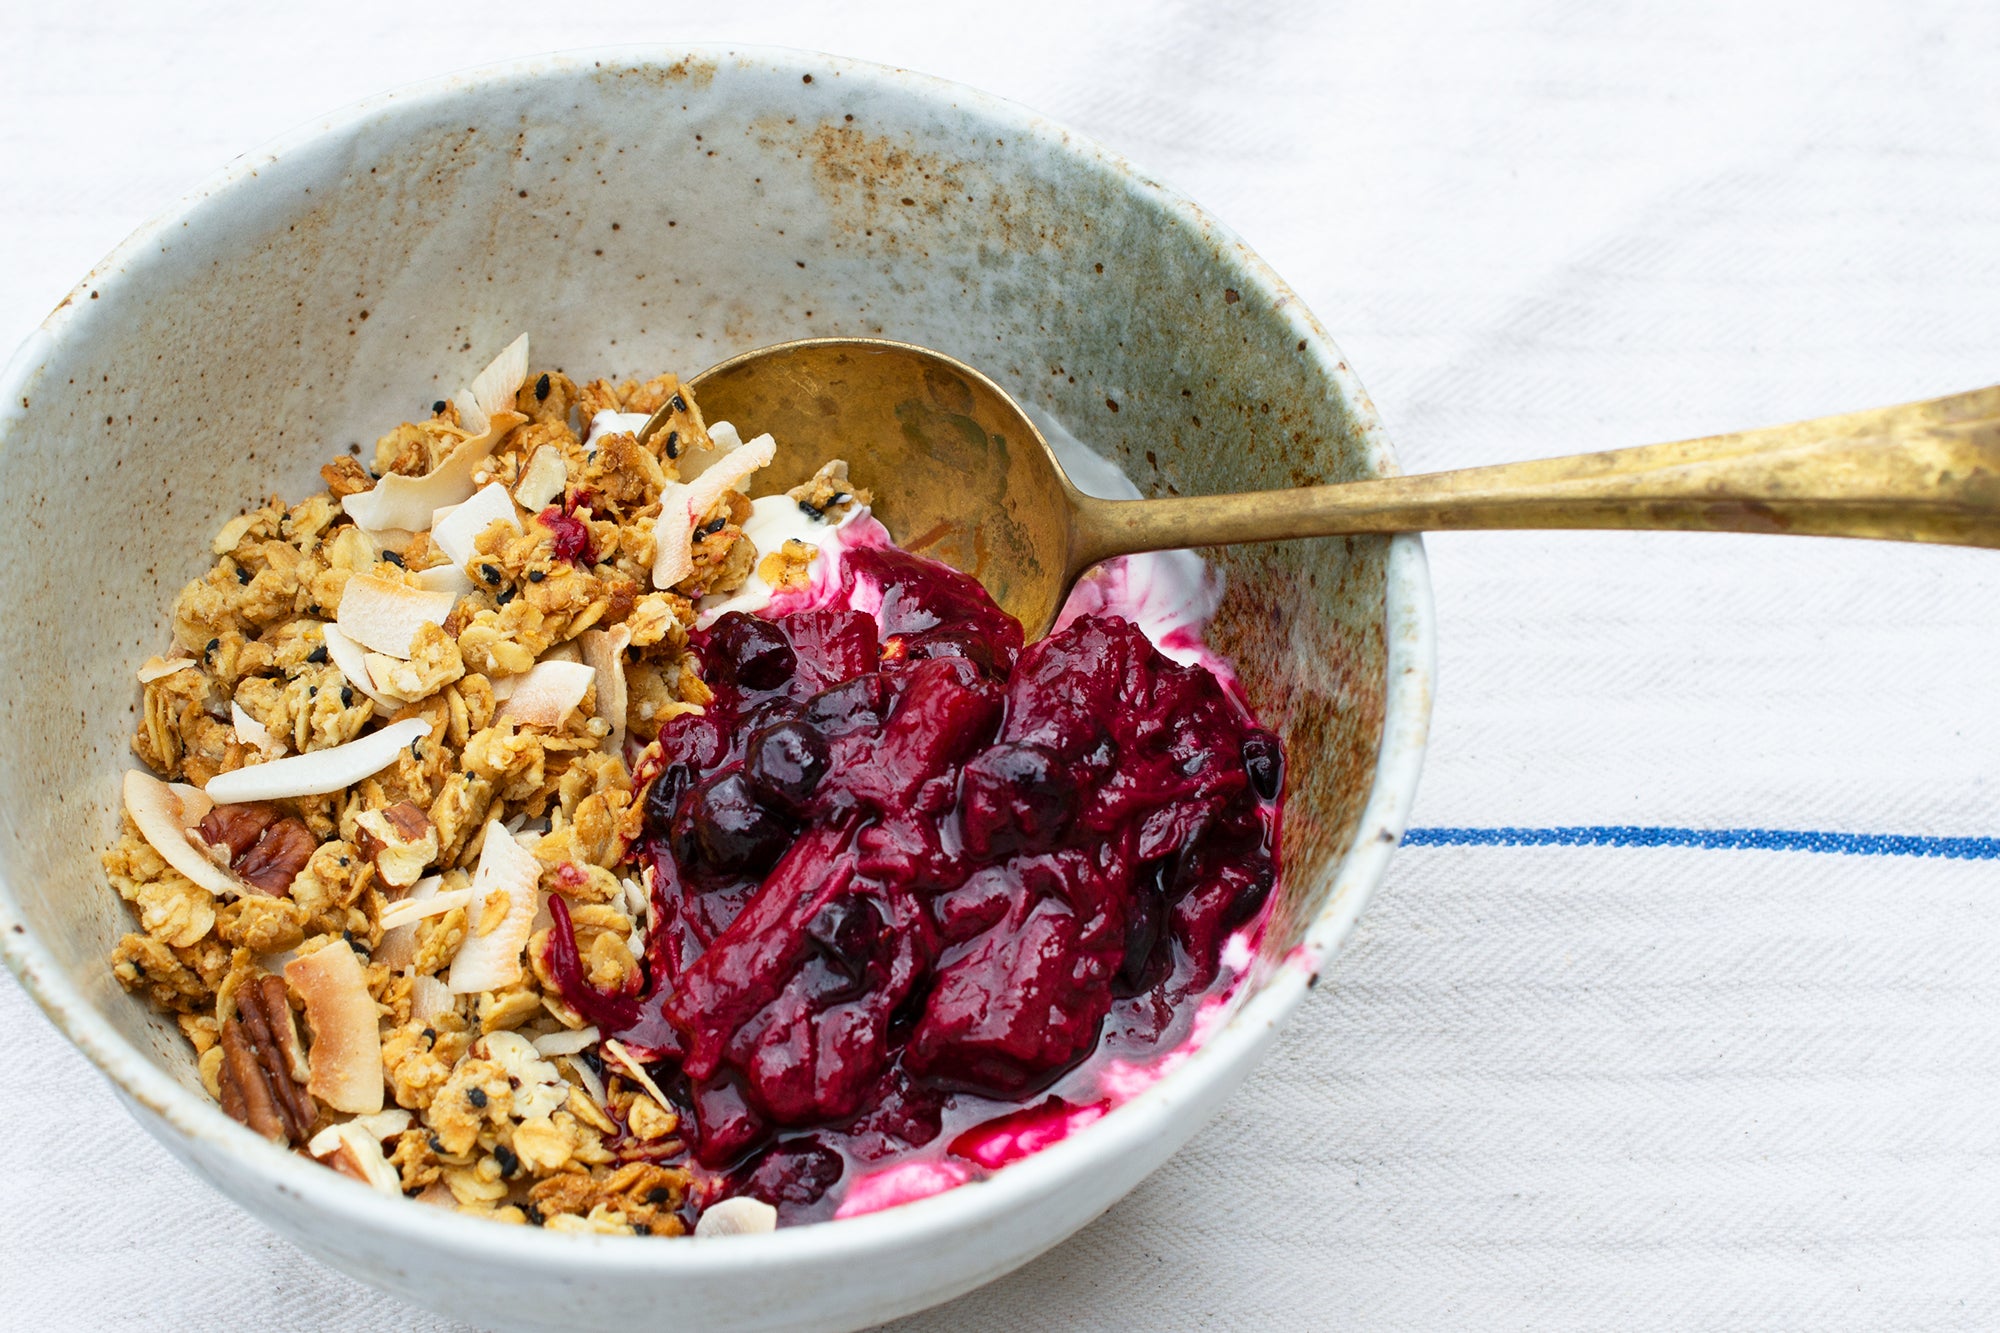 Pecan and coconut granola with roasted rhubarb and blackcurrants